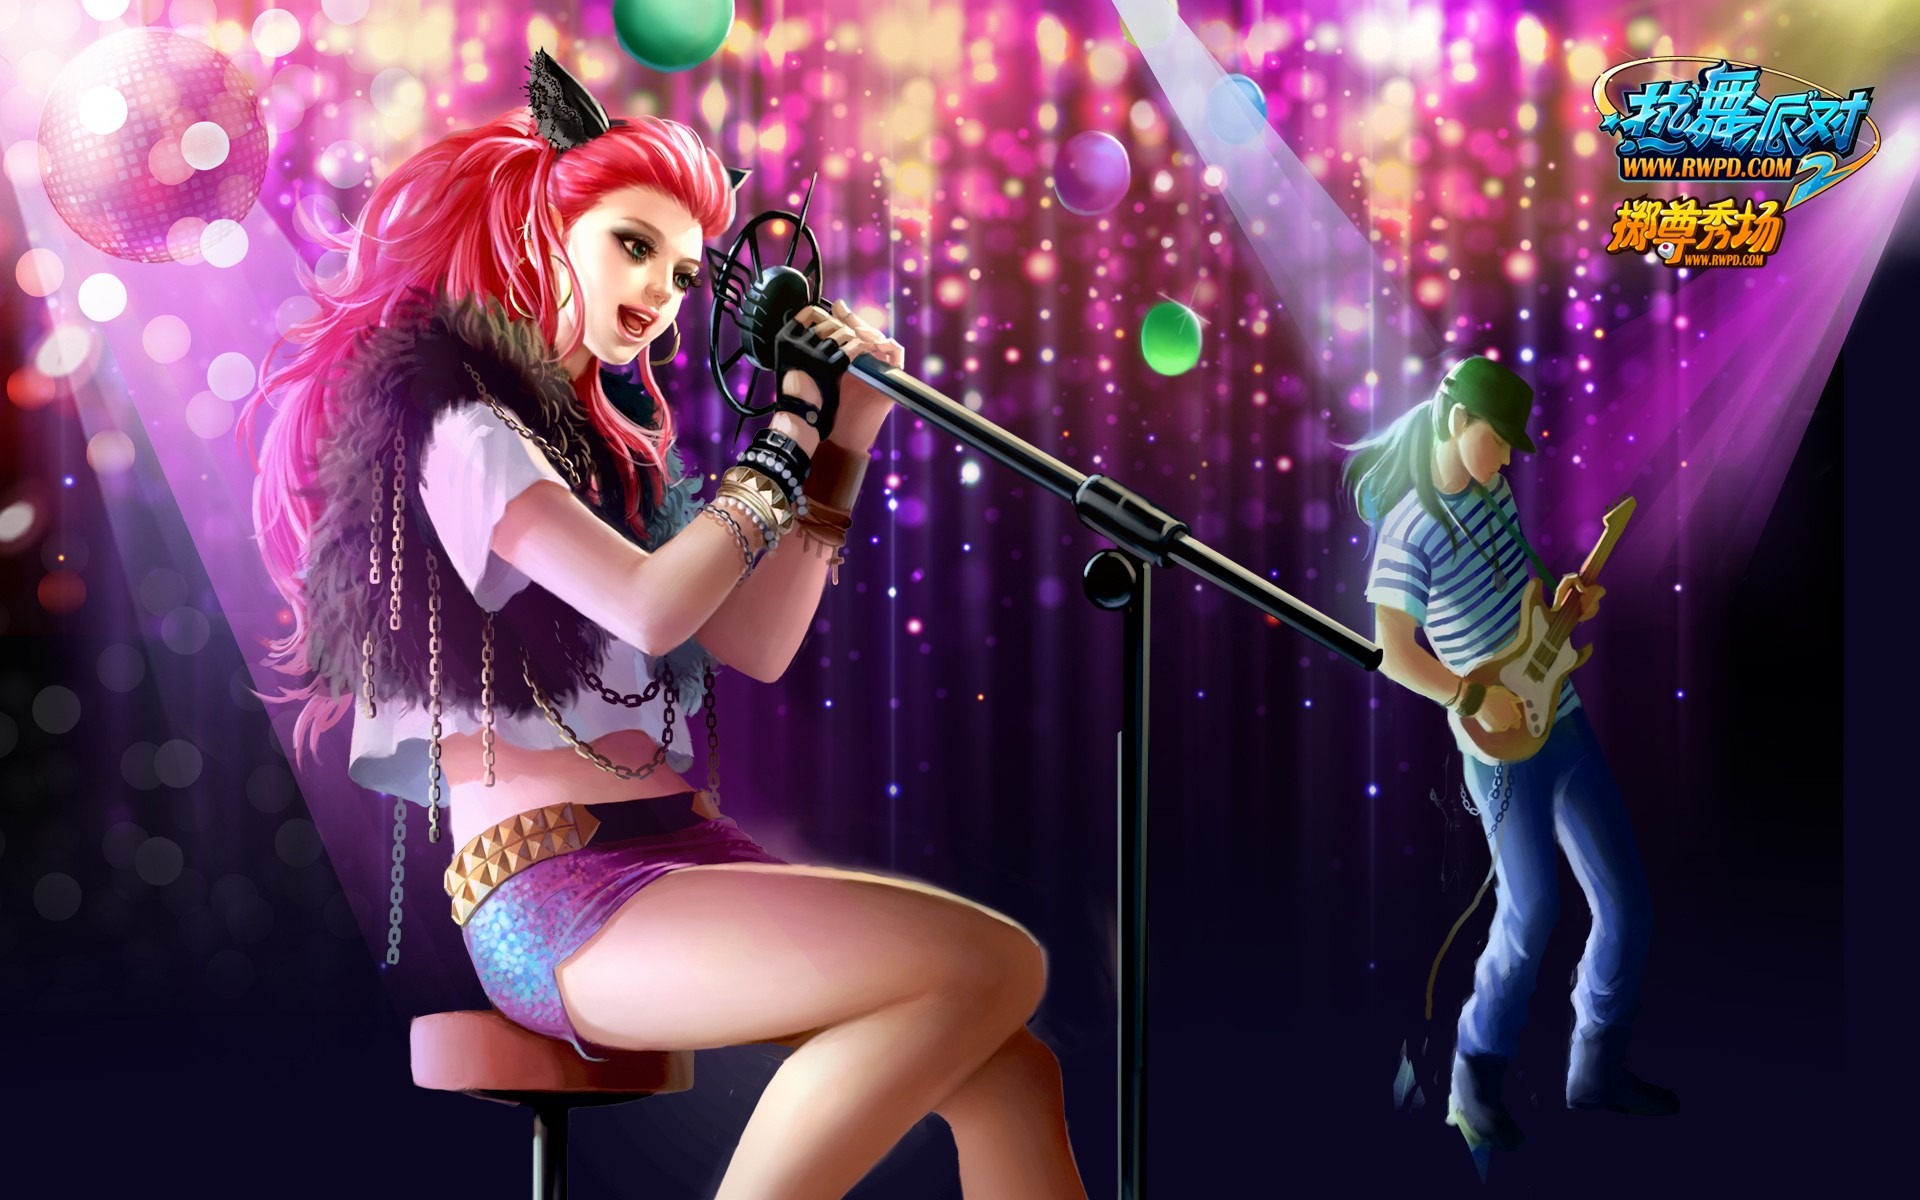 Online game Hot Dance Party II official wallpapers #38 - 1920x1200